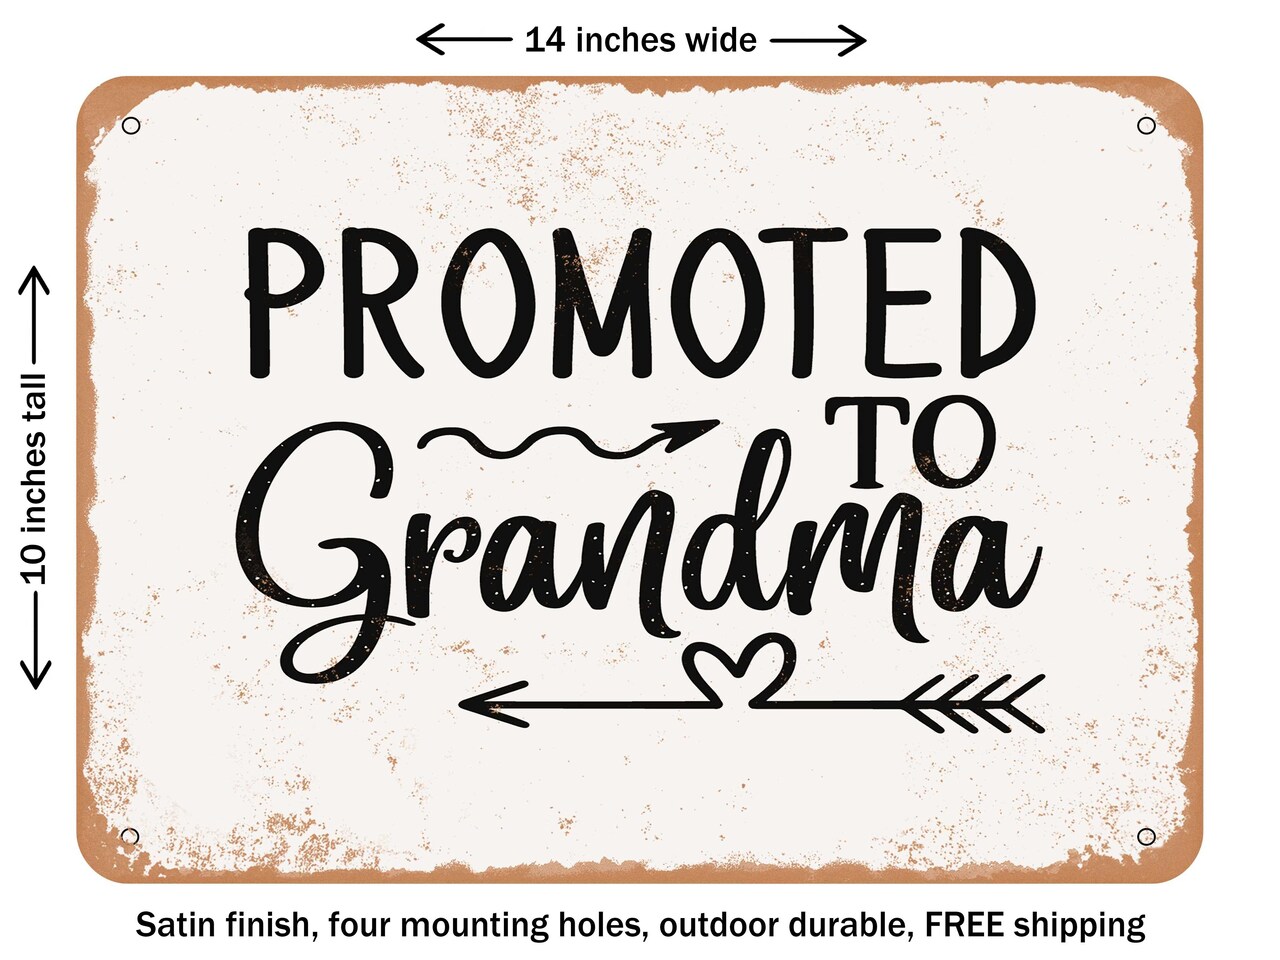 DECORATIVE METAL SIGN - Promoted to Grandma - Vintage Rusty Look